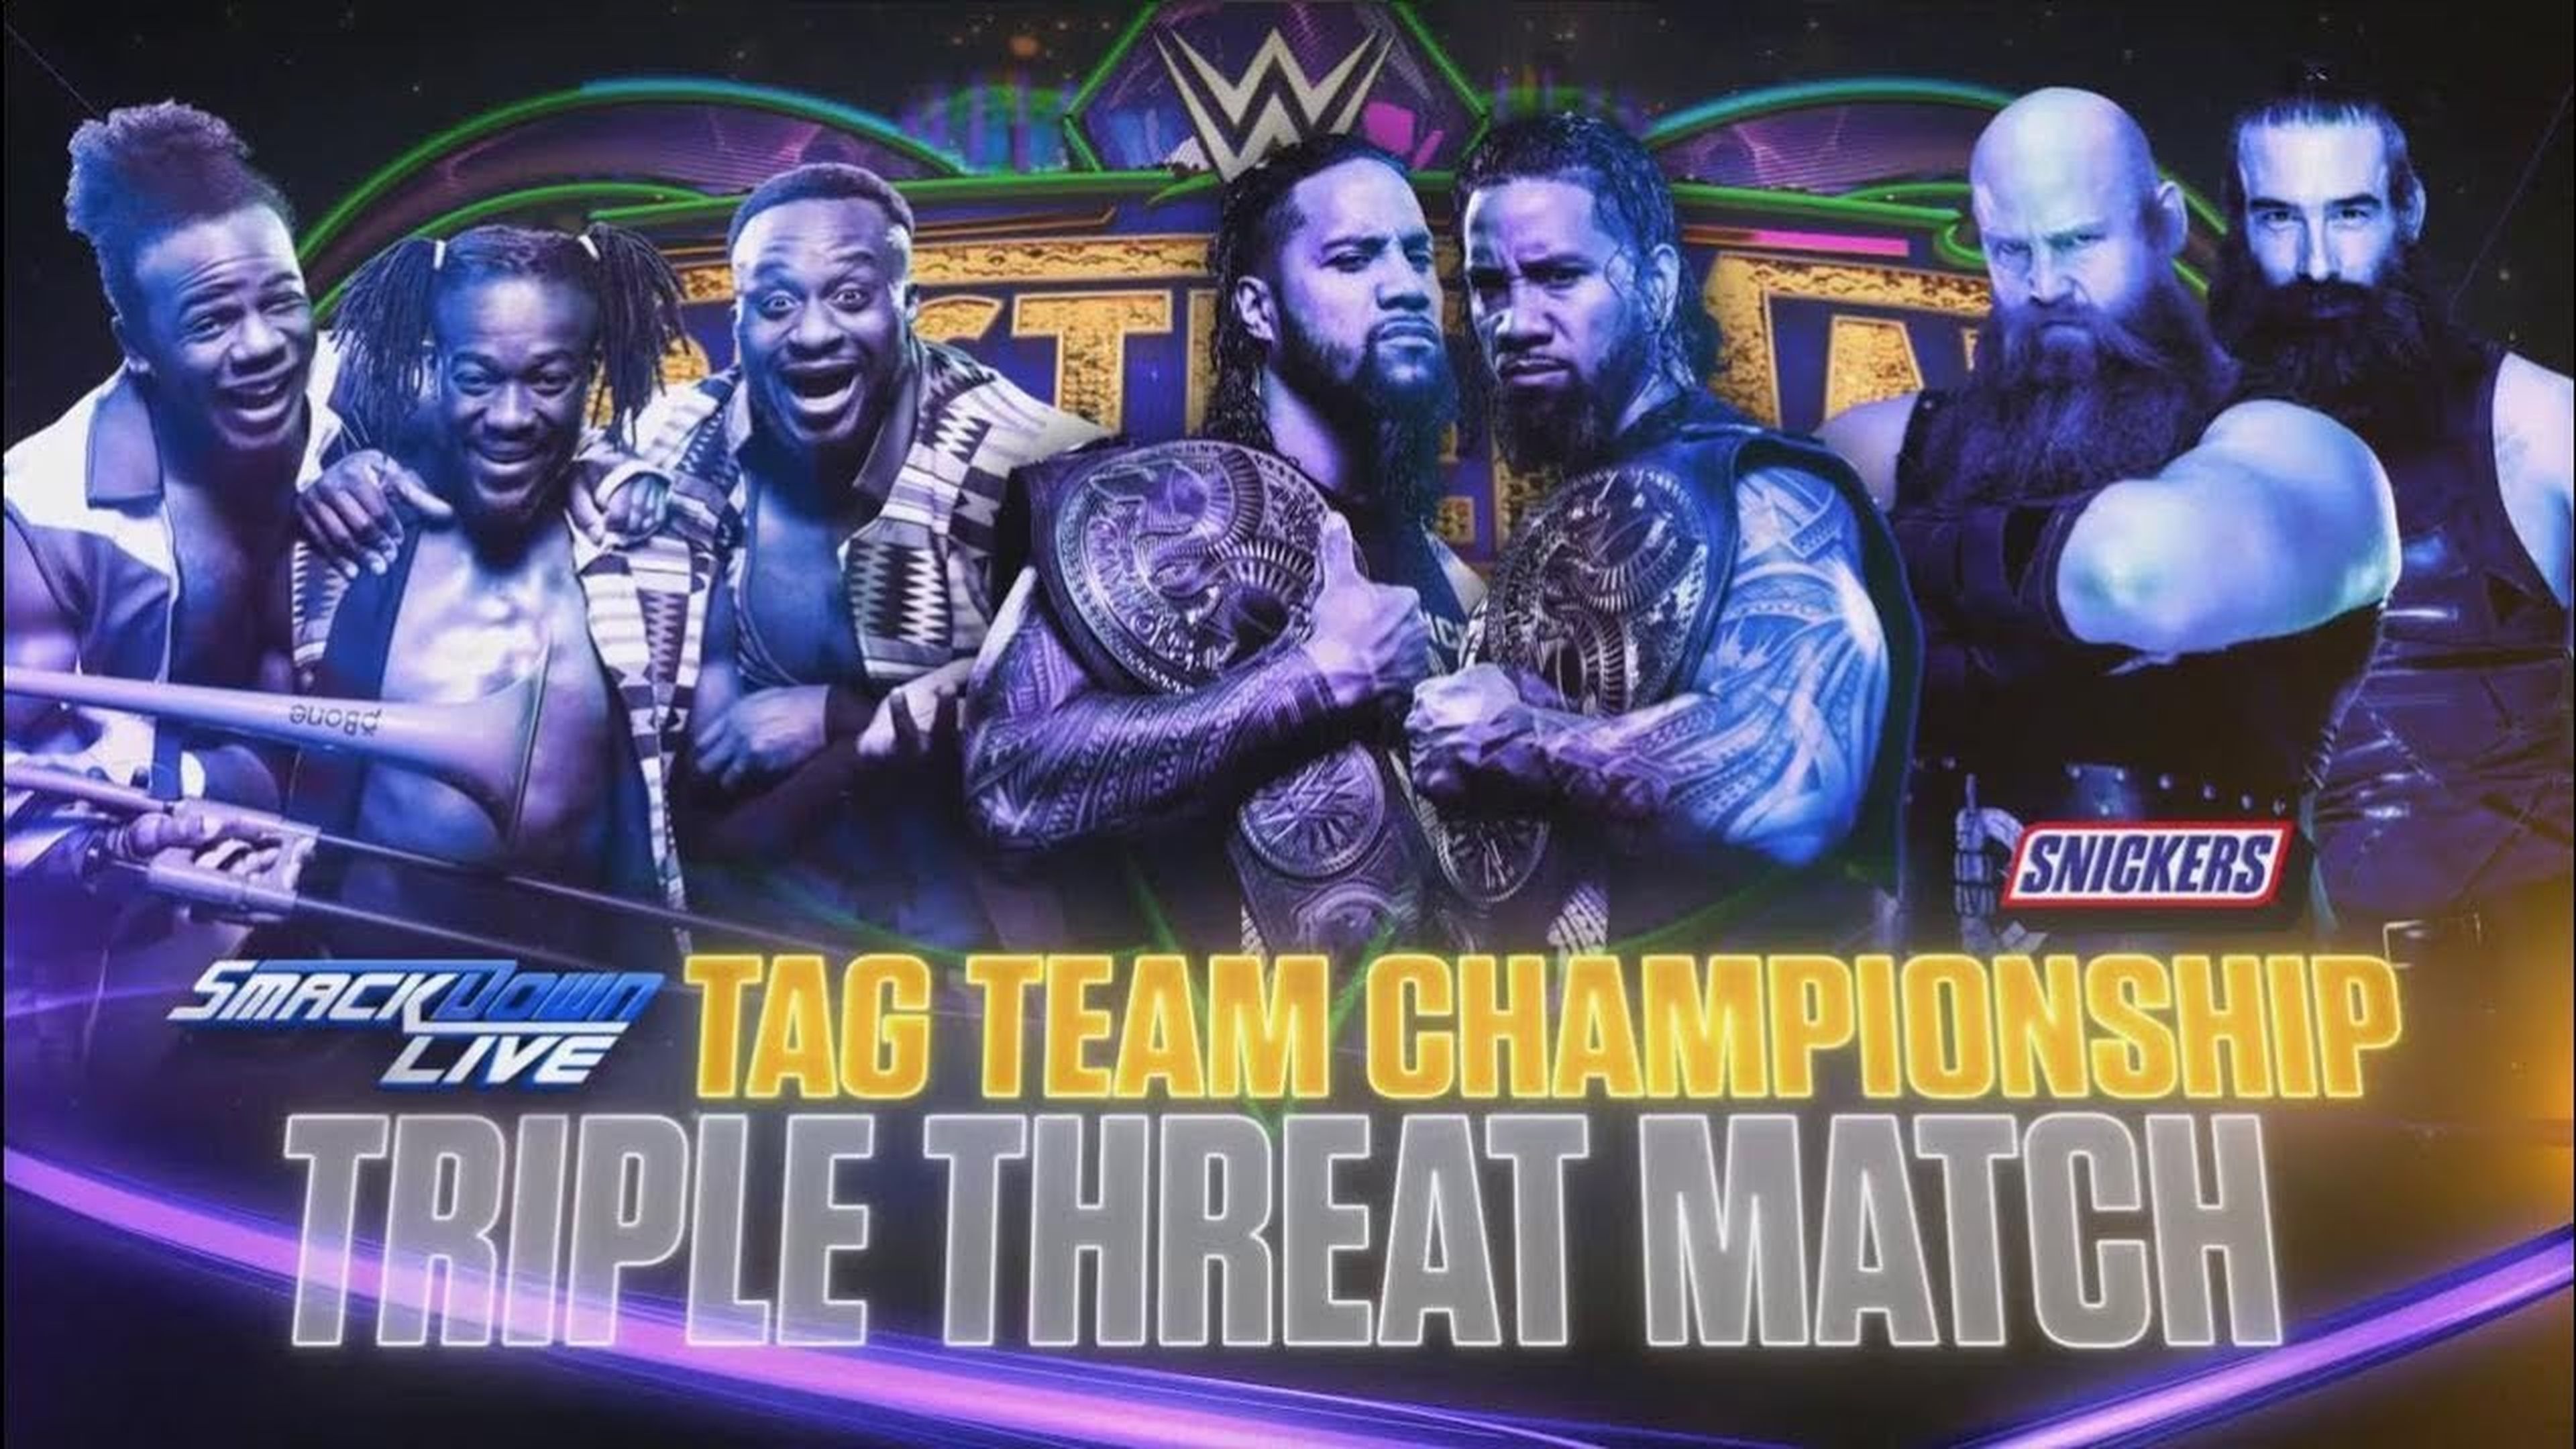 WWE WrestleMania 34 - Campeonato por Equipos de SmackDown - The Usos vs. The New Day vs T.he Bludgeon Brothers